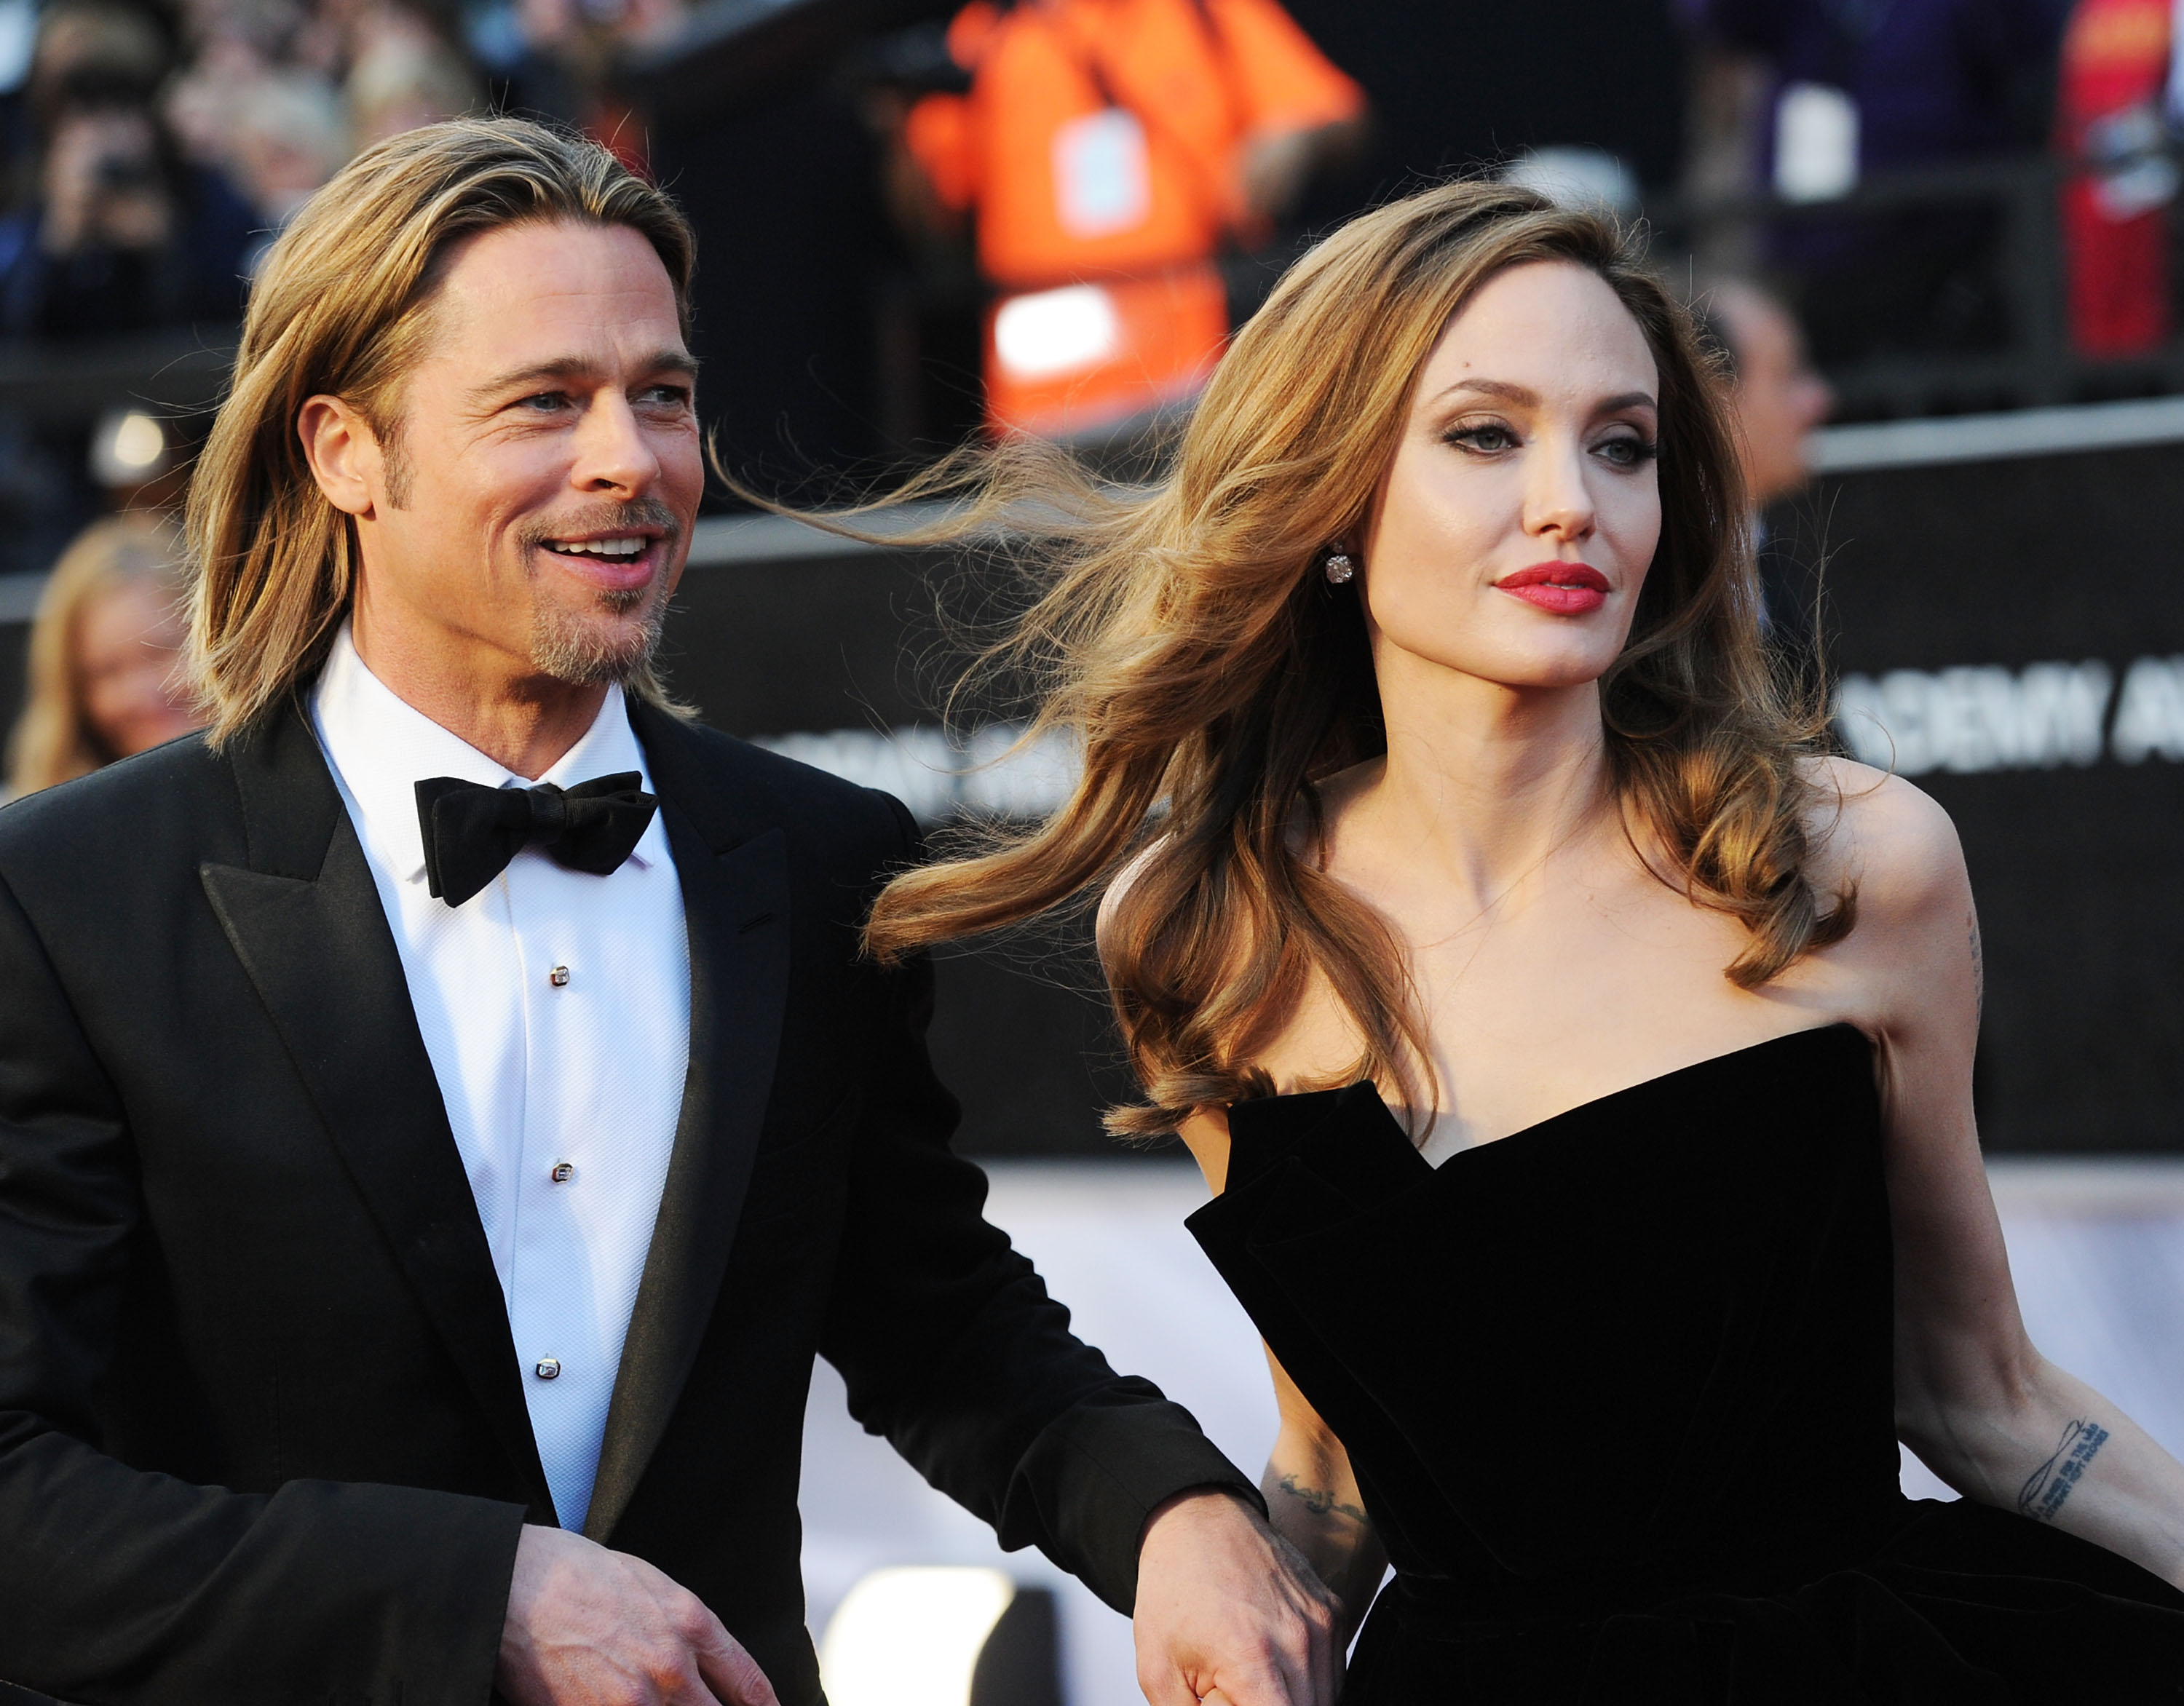 Angelina Jolie and Brad Pitt at the 84th Annual Academy Awards in 2012 | Source: Getty Images